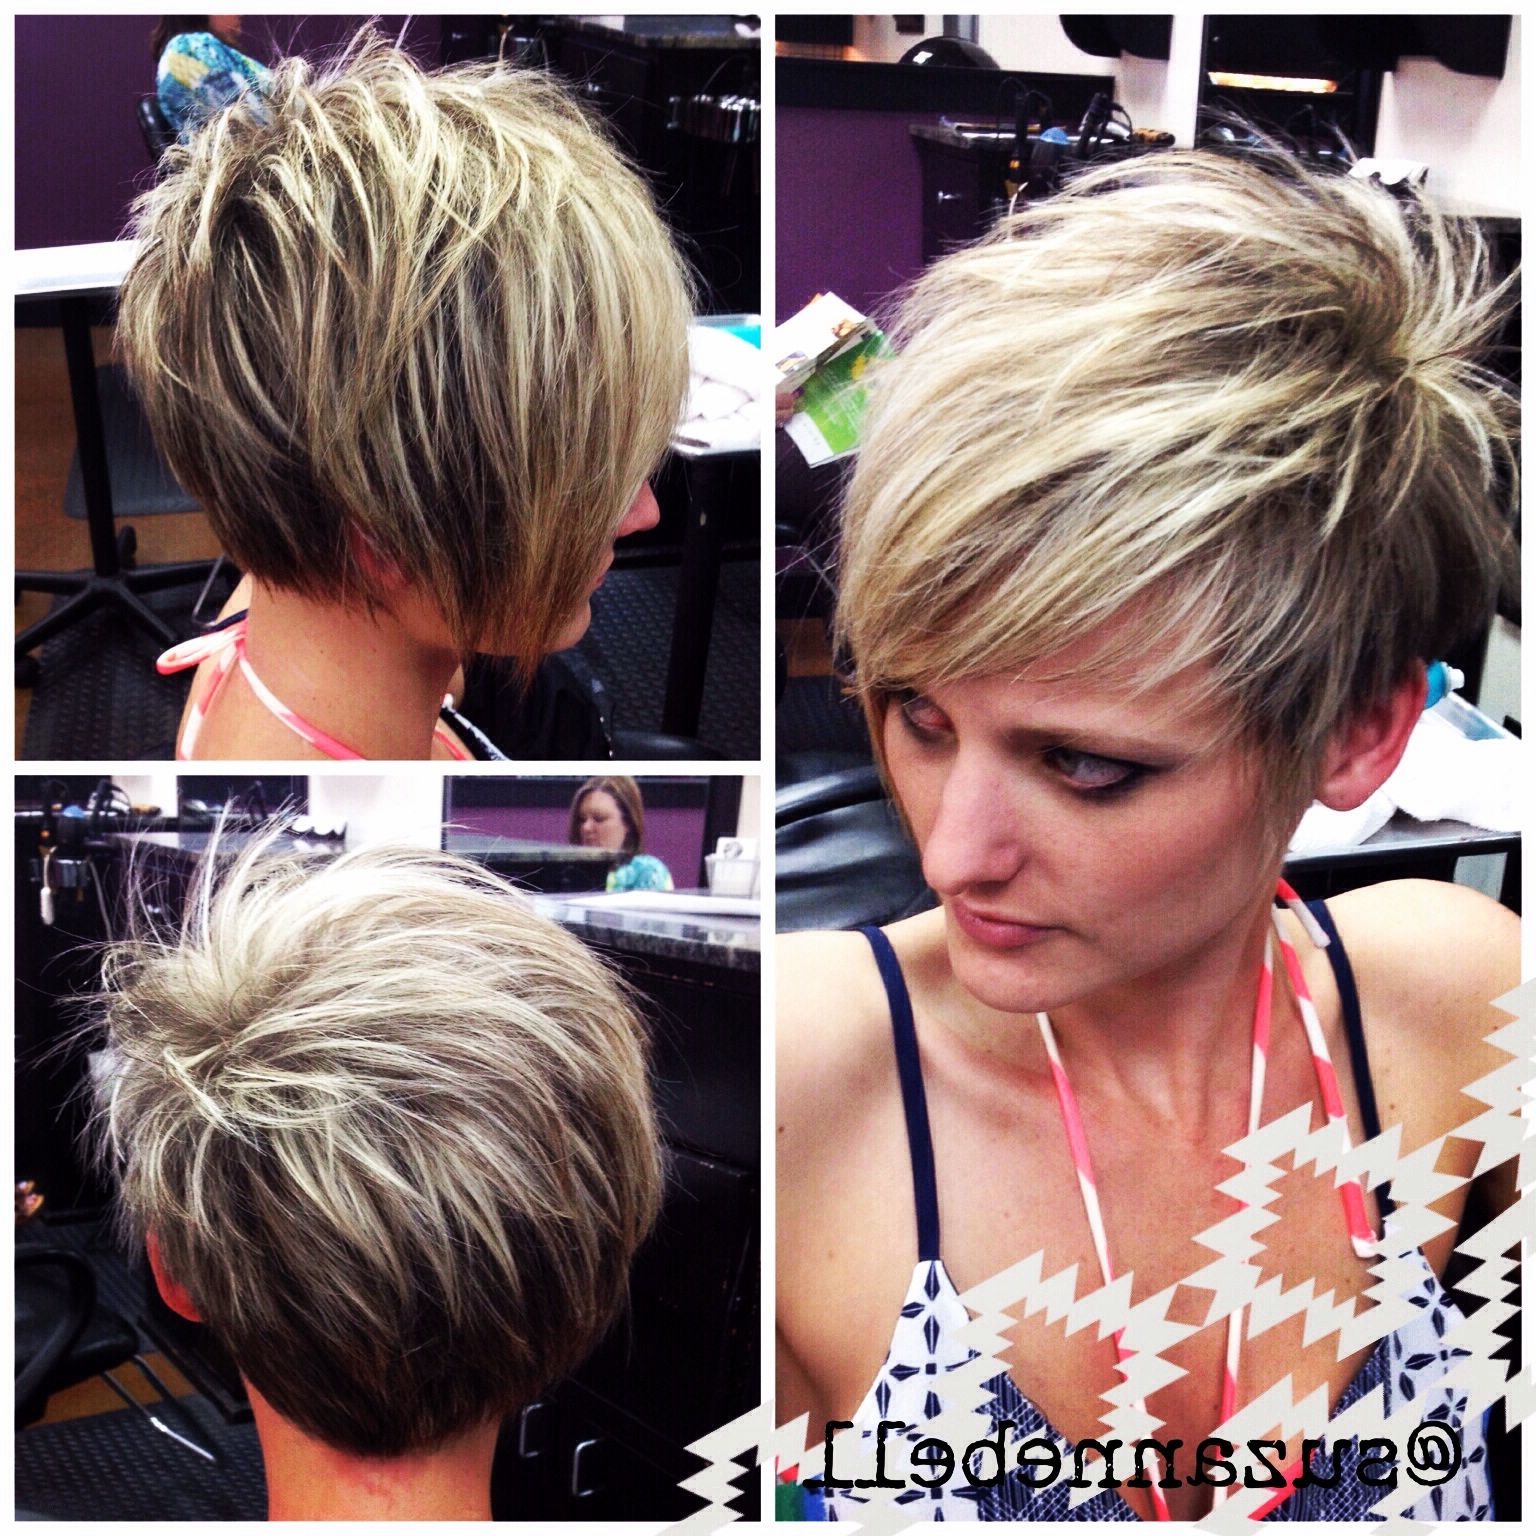 Asymmetrical Pixie | Hair Inspiration | Pinterest | Asymmetrical Pertaining To Most Current Short Stacked Pixie Hairstyles (View 5 of 15)